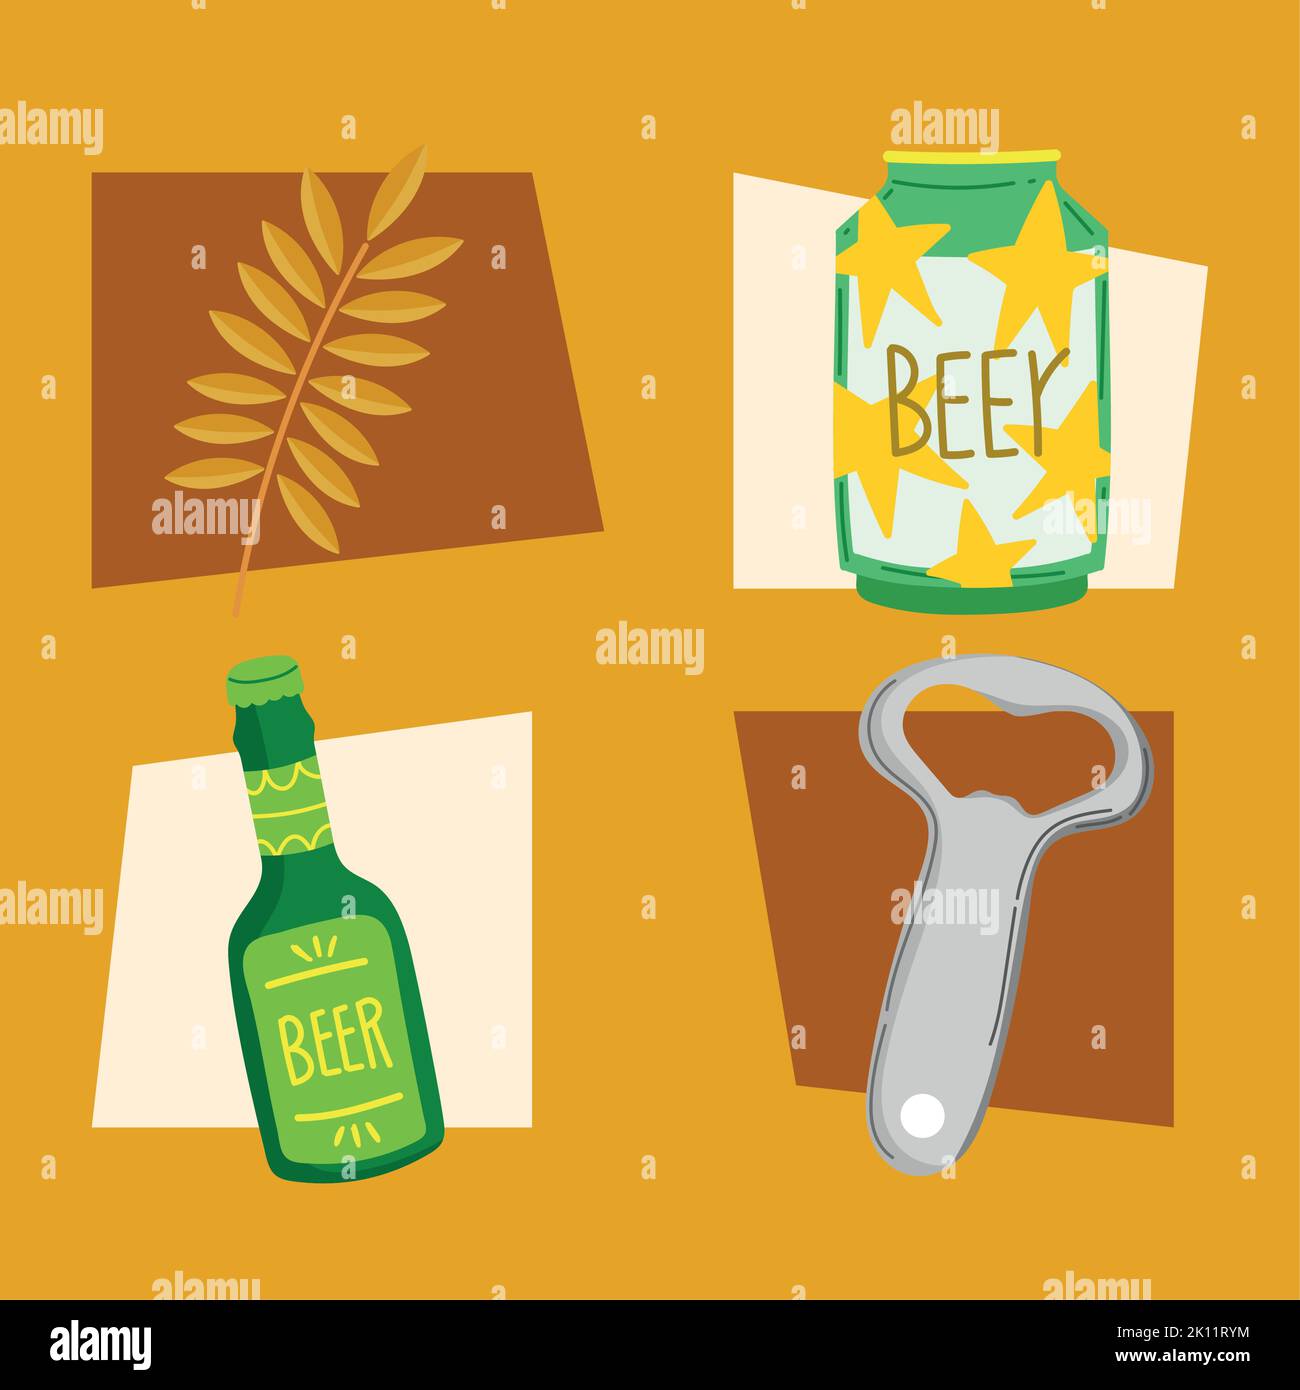 international beer day, icon set Stock Vector